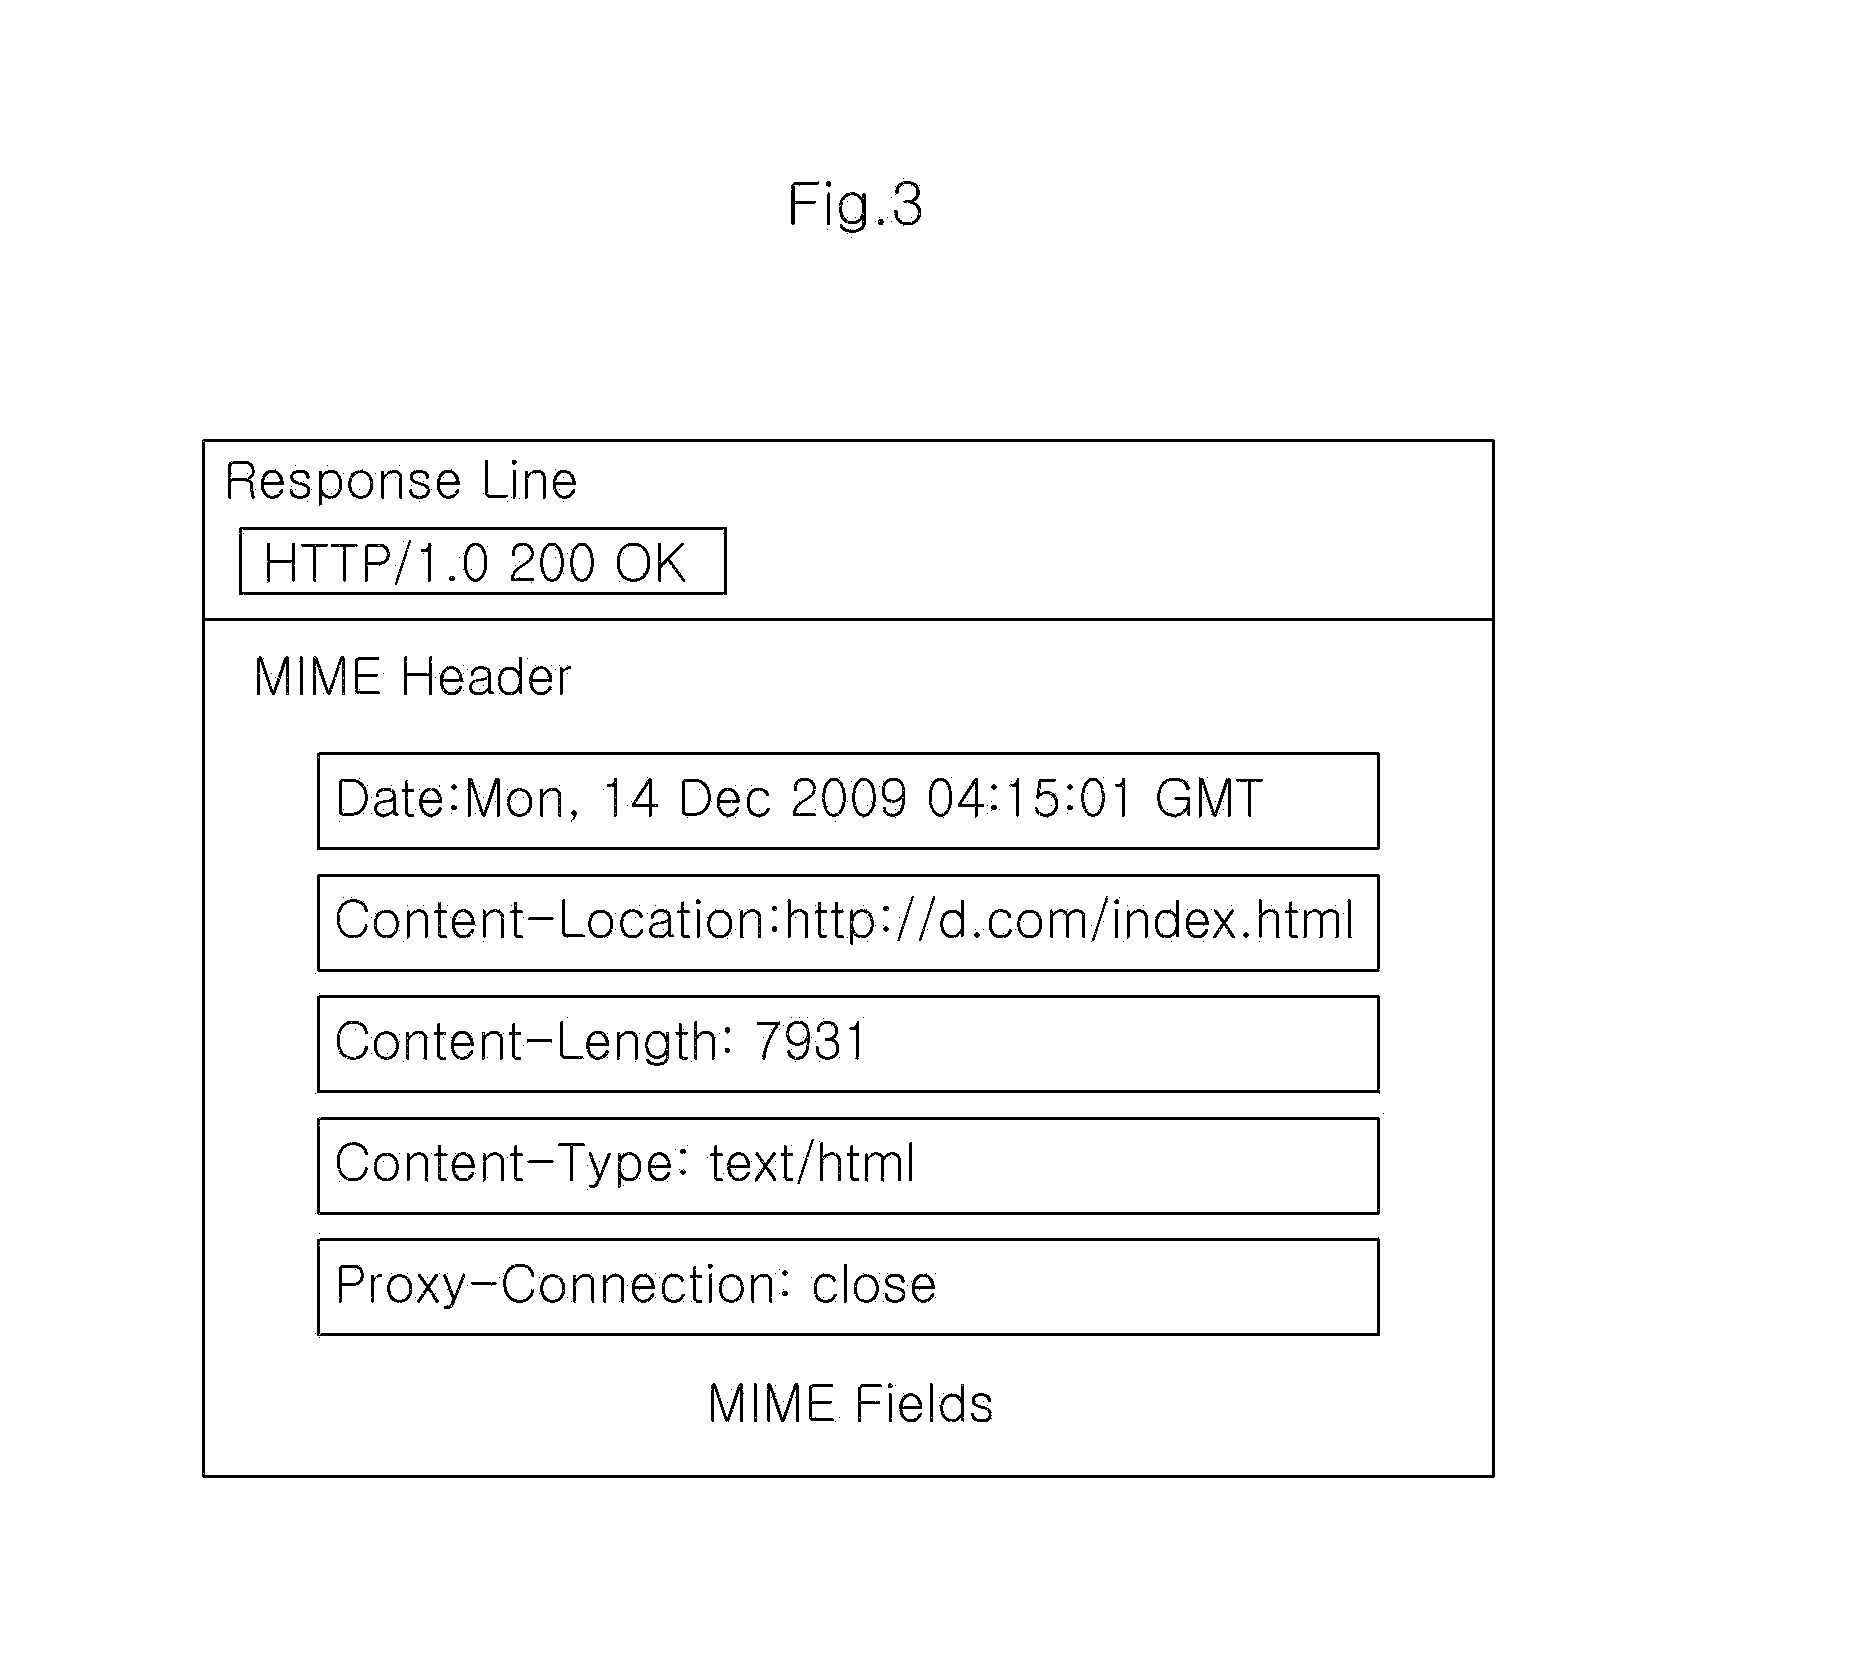 Apparatus and method for identifying available access points